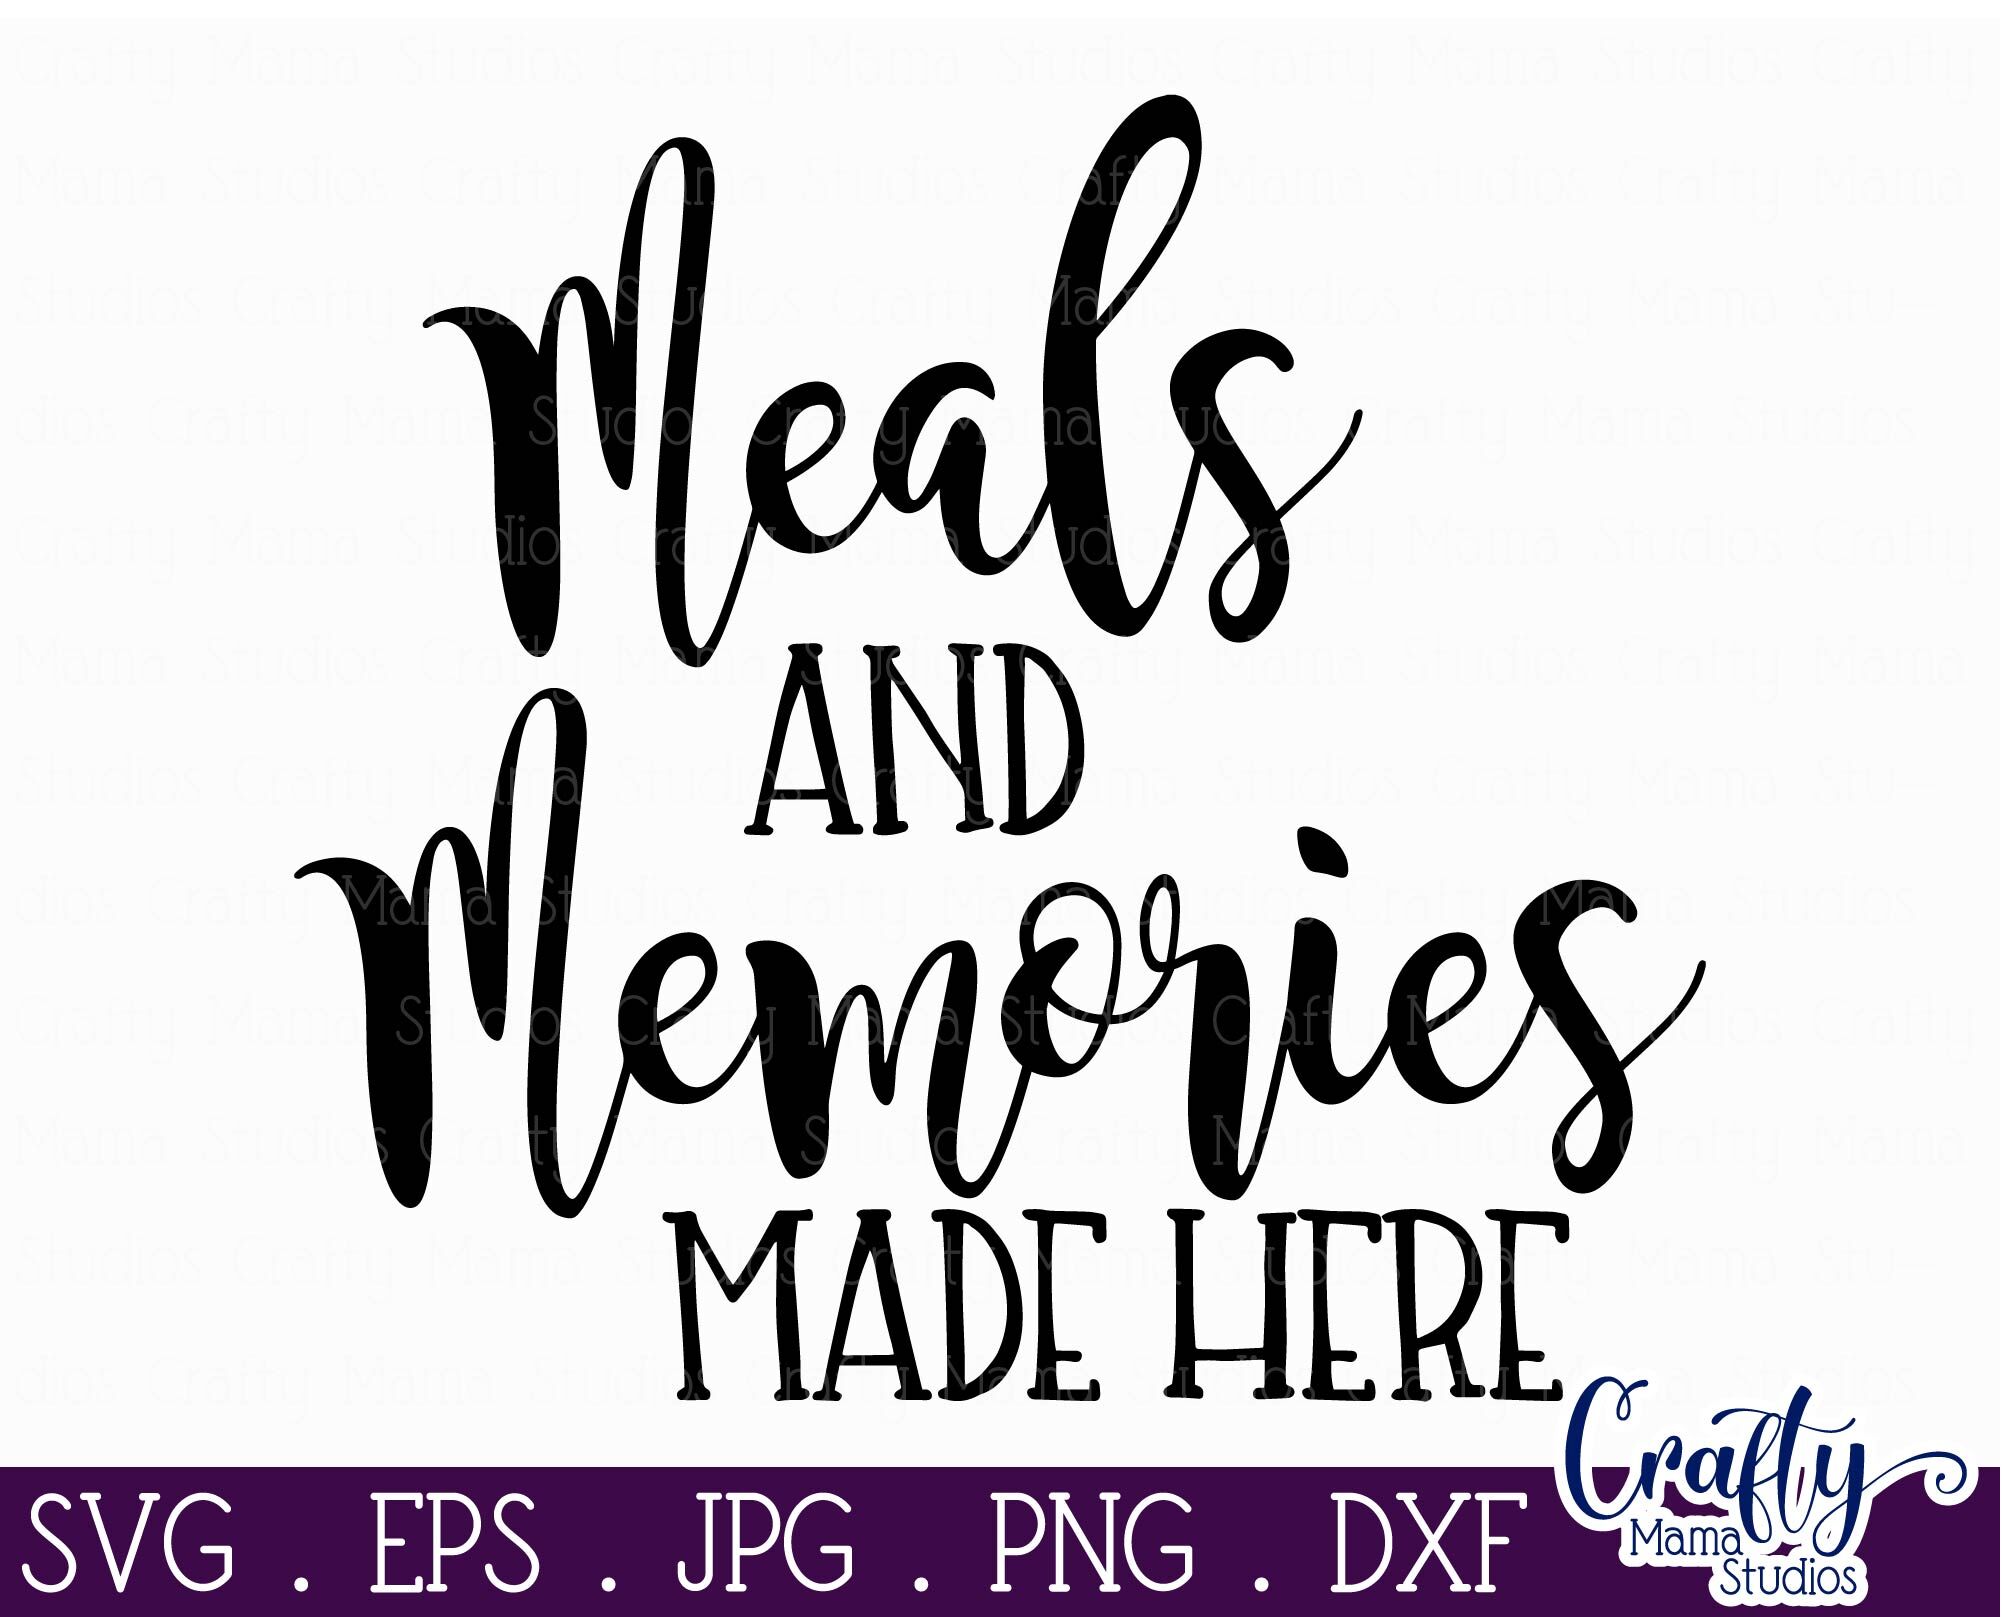 Download Home Svg, Kitchen Svg, Meals And Memories Made Here By ...